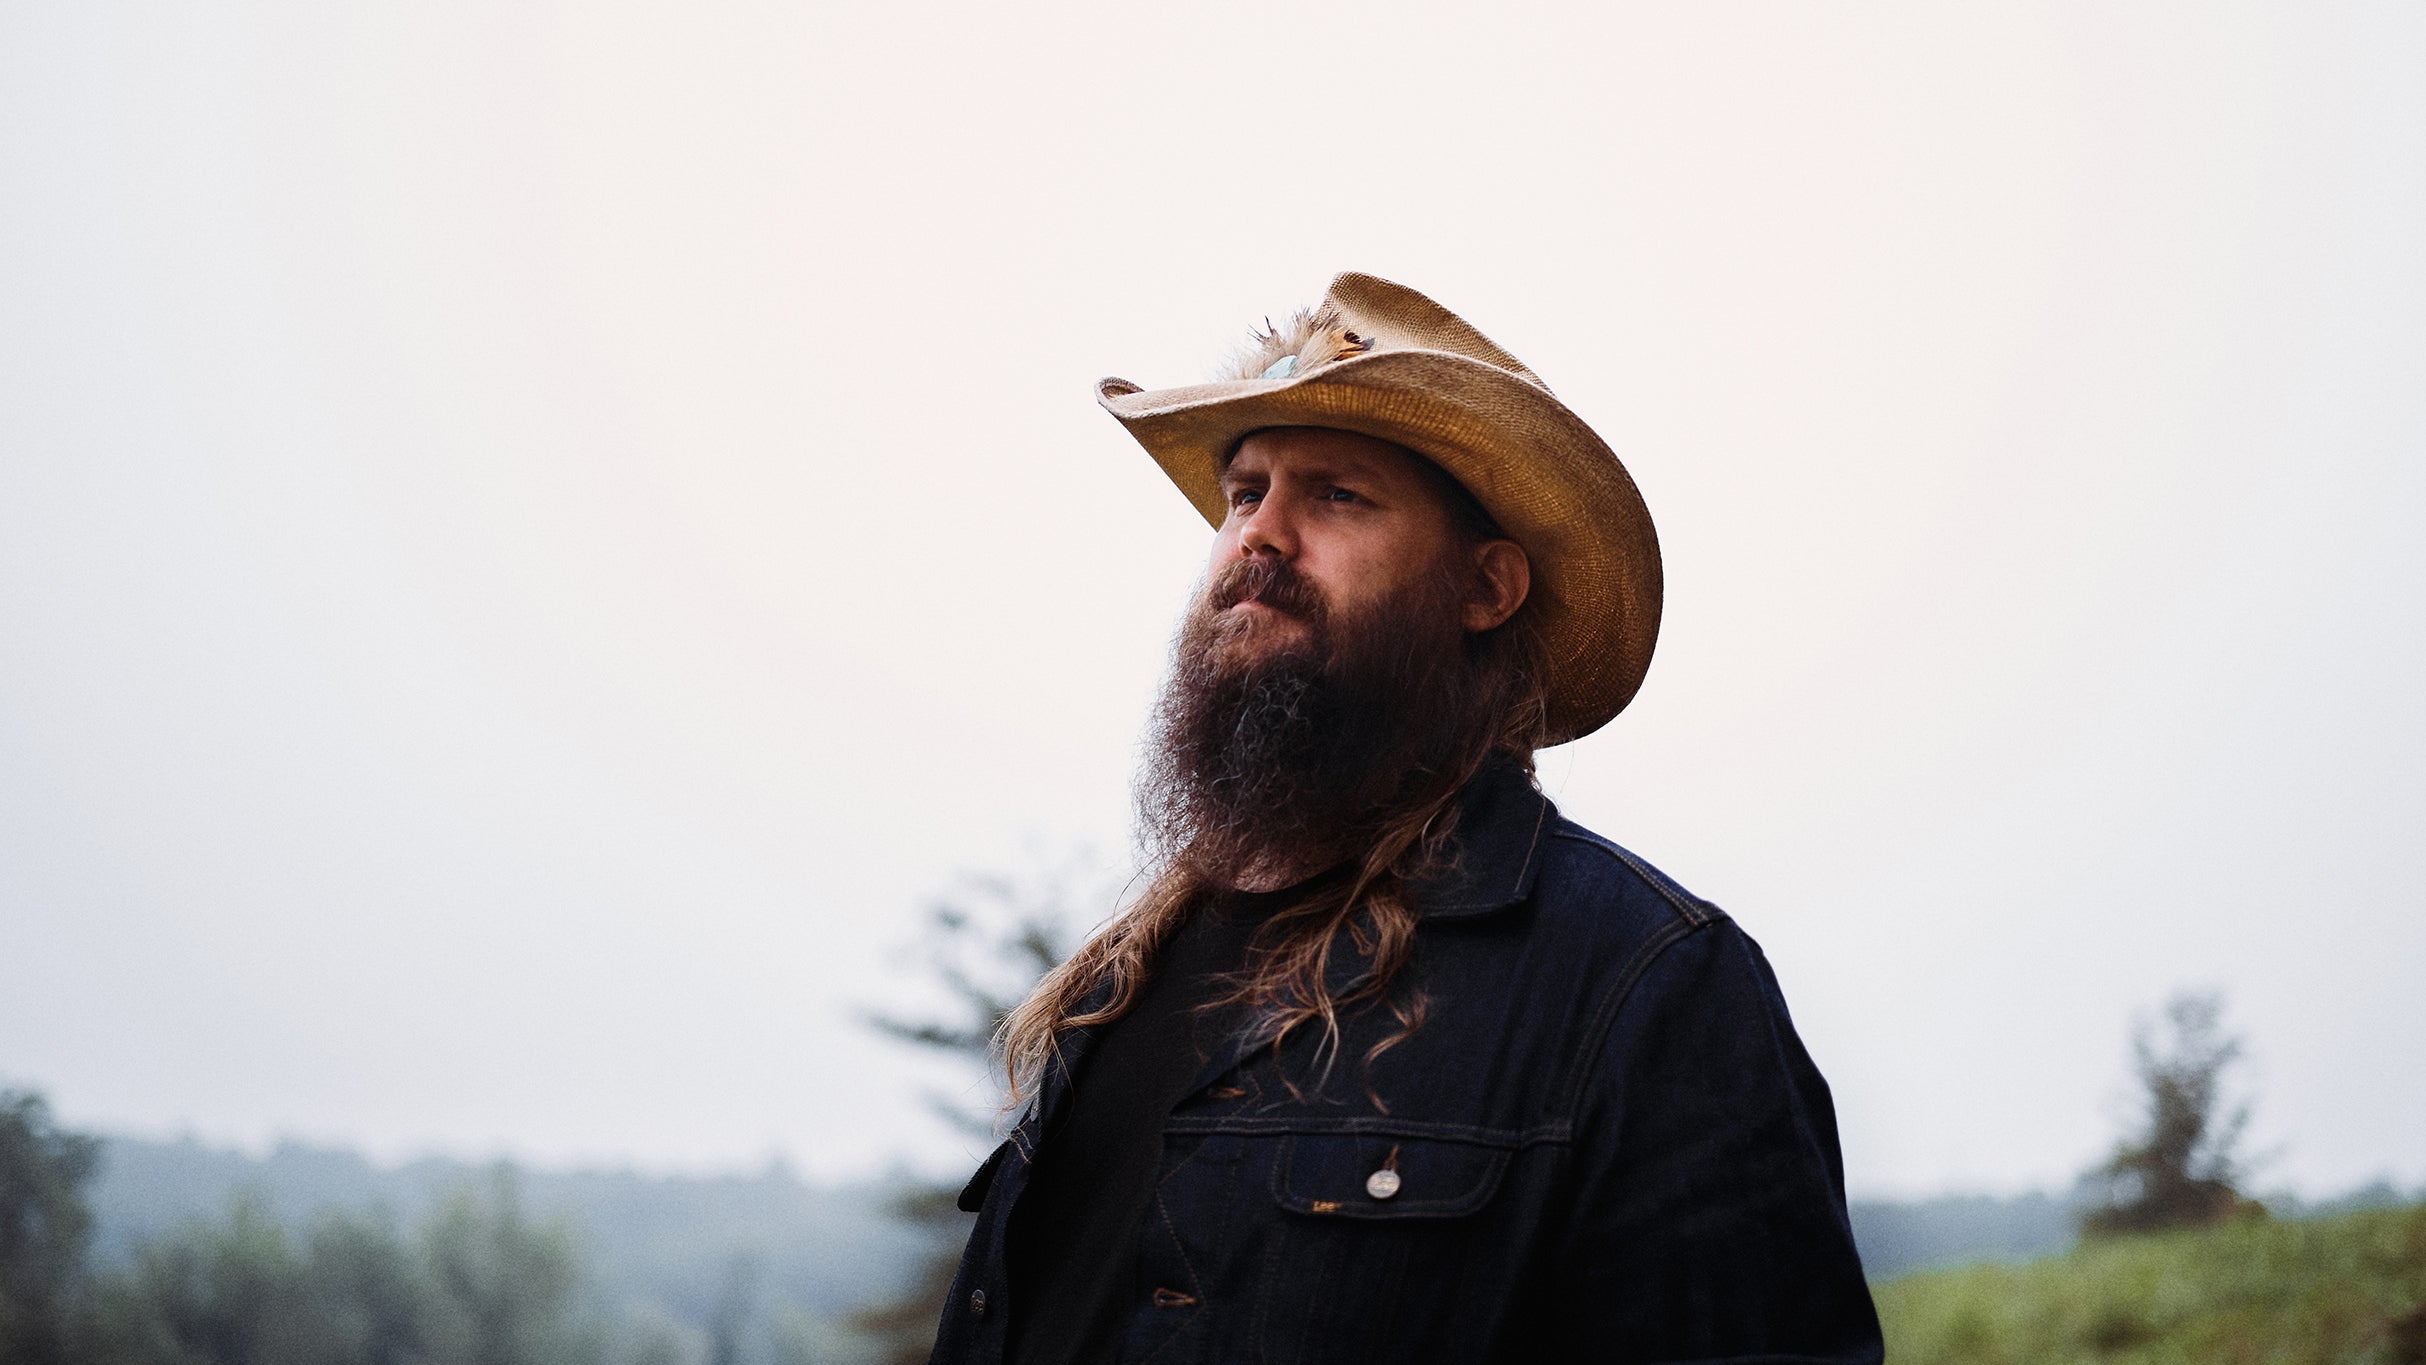 working presale code for Chris Stapleton's All-American Road Show advanced tickets in Ridgedale at Thunder Ridge Nature's Arena